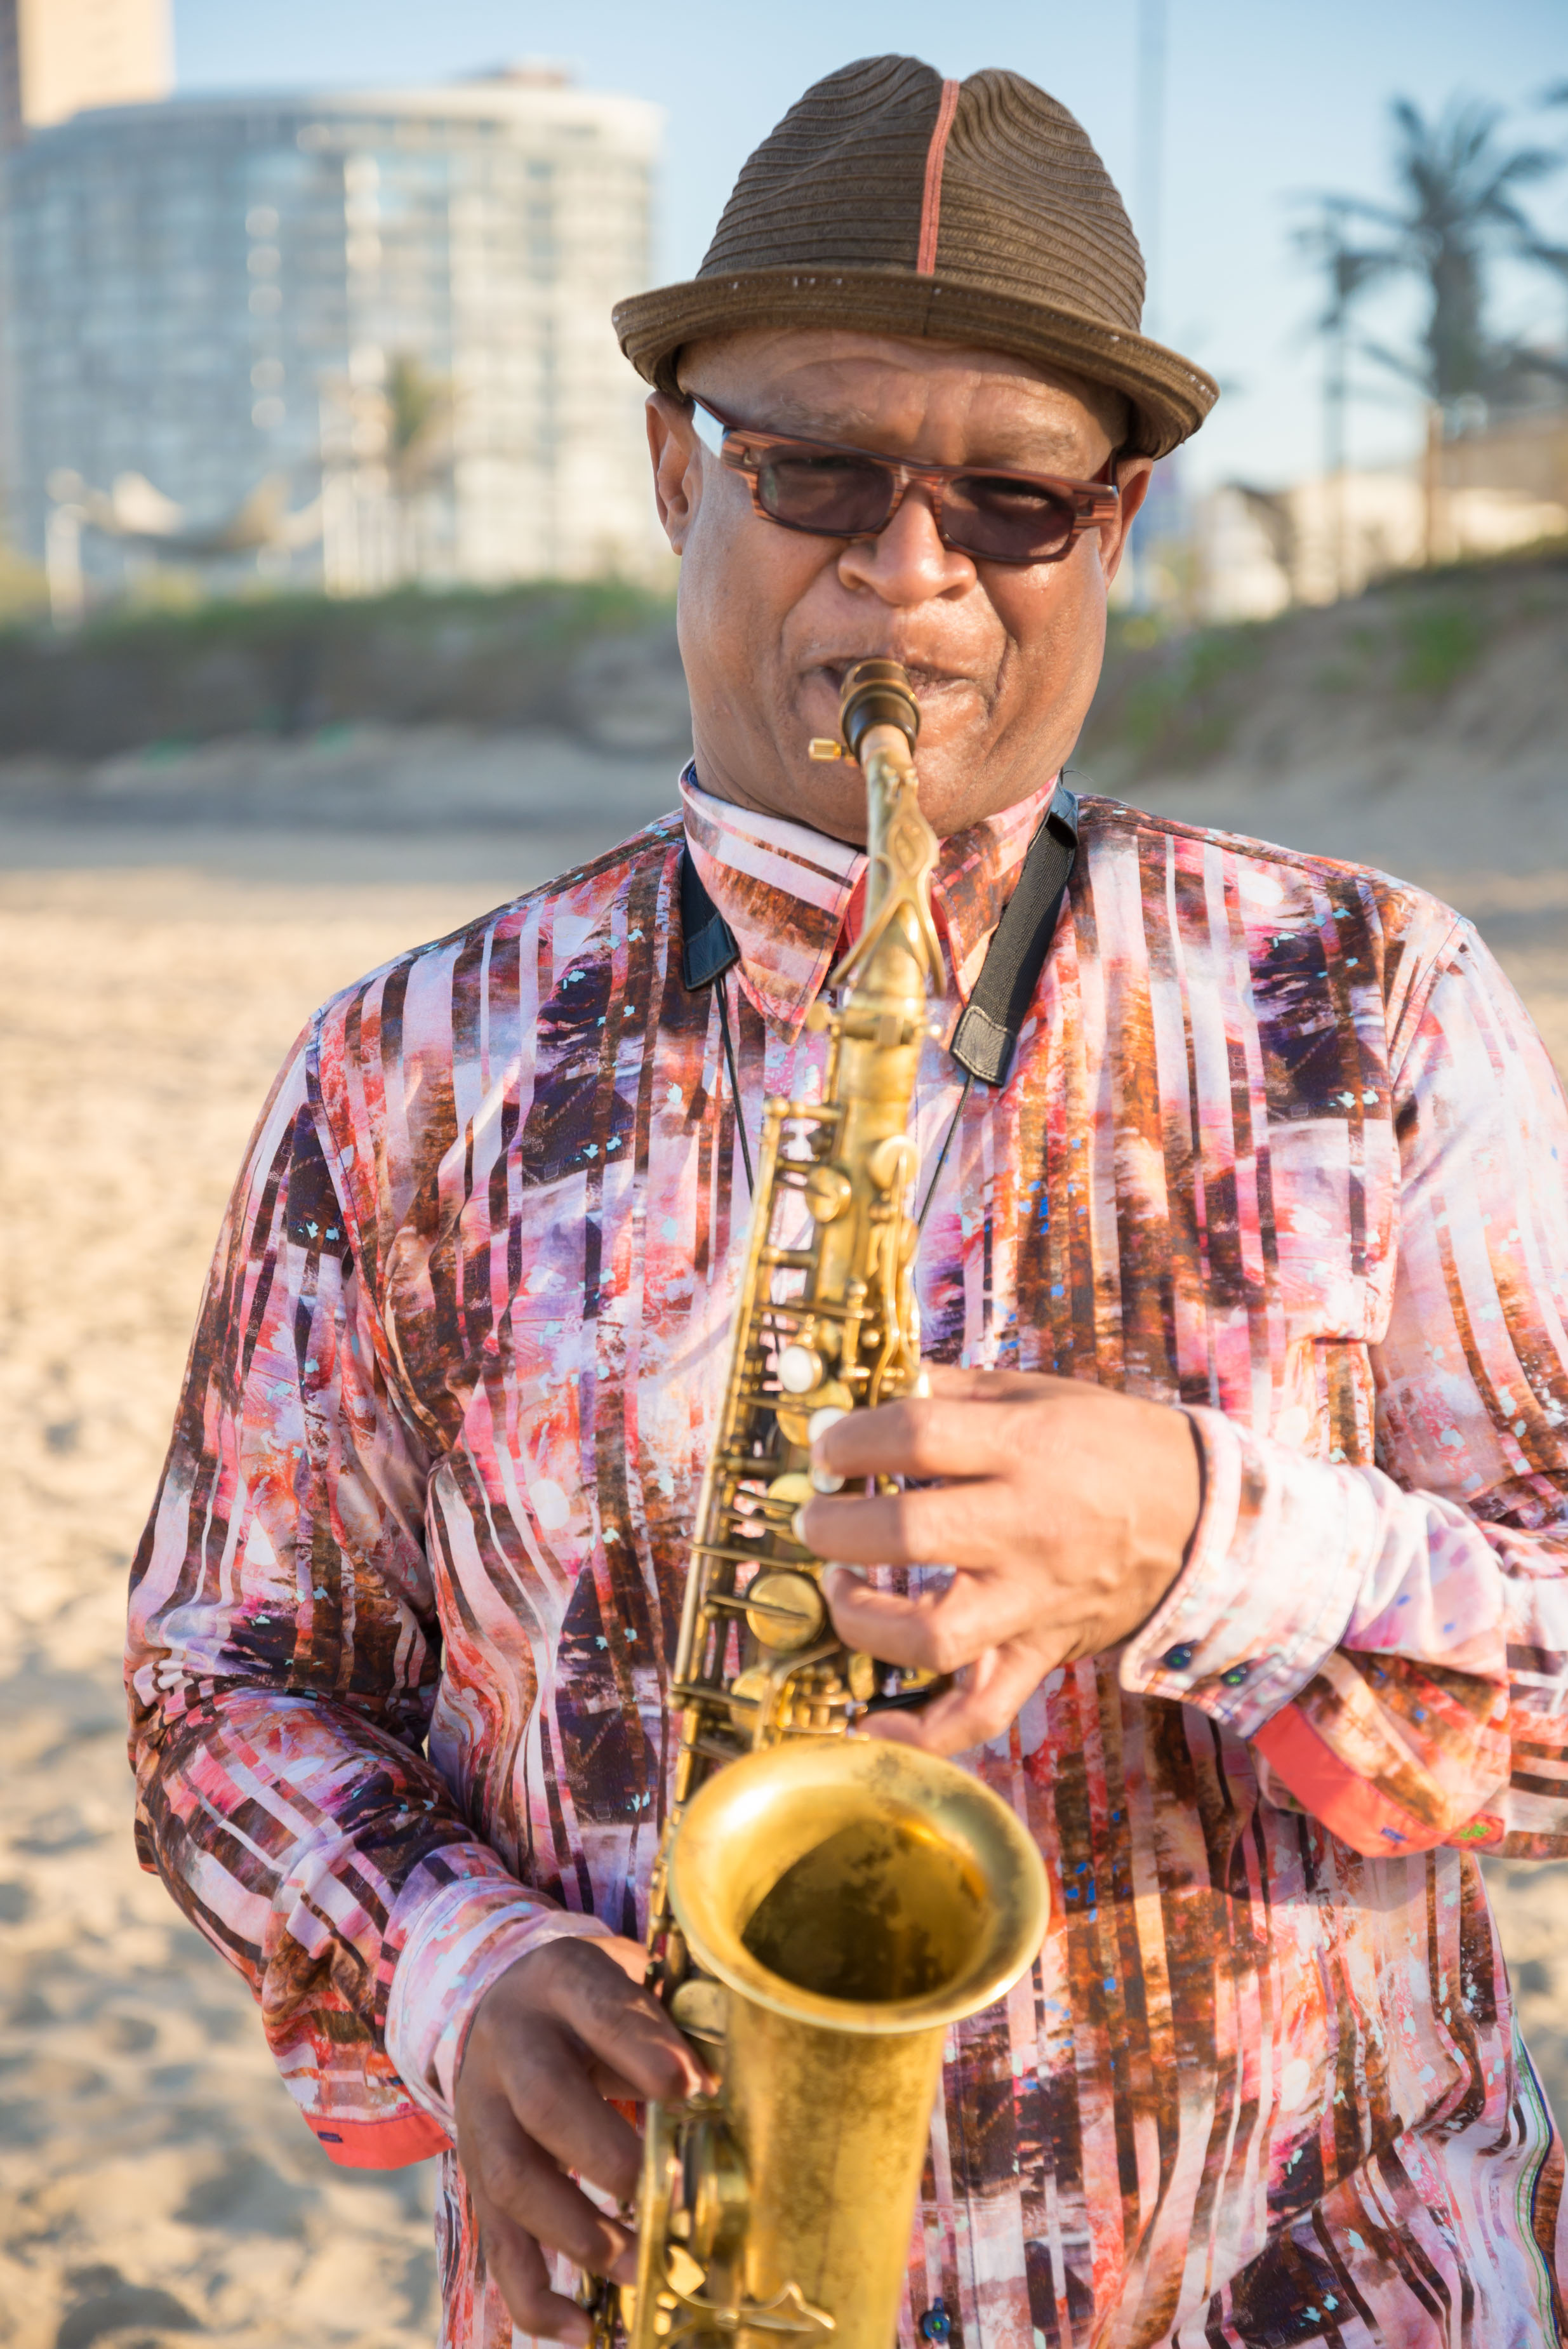 Ernest Dawkins  is one of the world’s premiere saxophonists and composers.